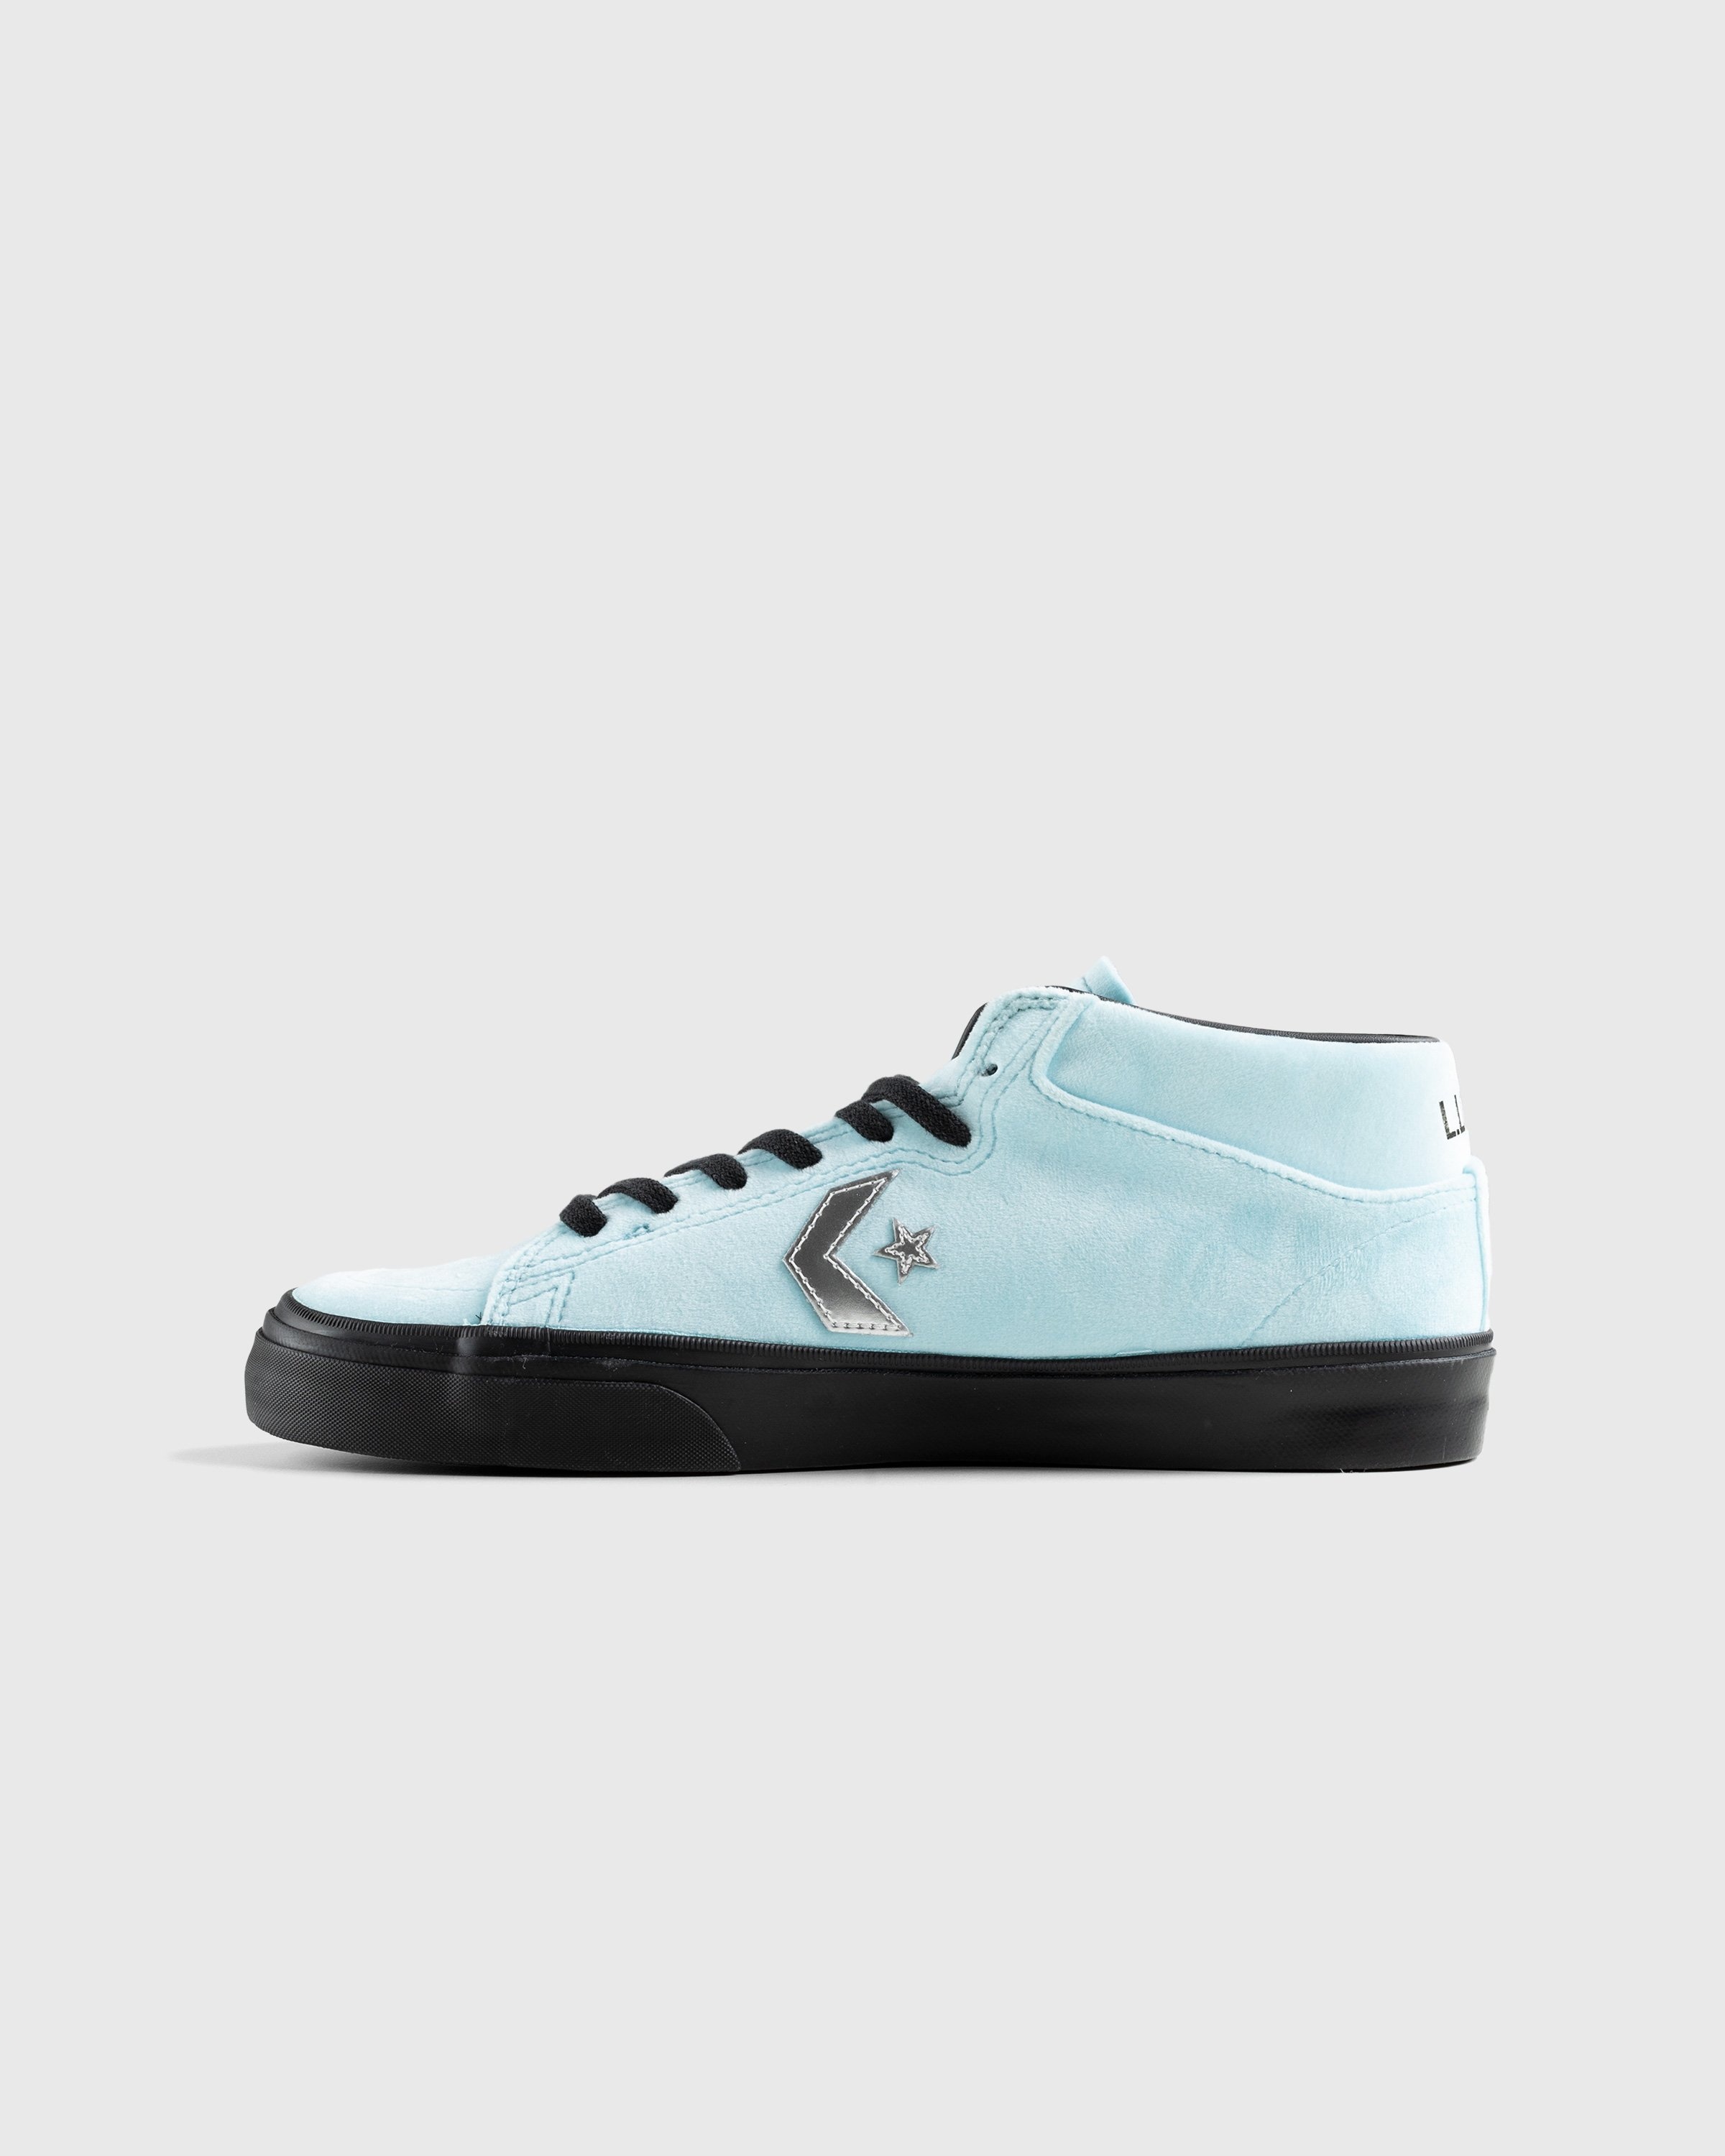 Converse x Fucking Awesome – Louie Lopez Pro Mid Cyan Tint/Black - High Top Sneakers - Blue - Image 2